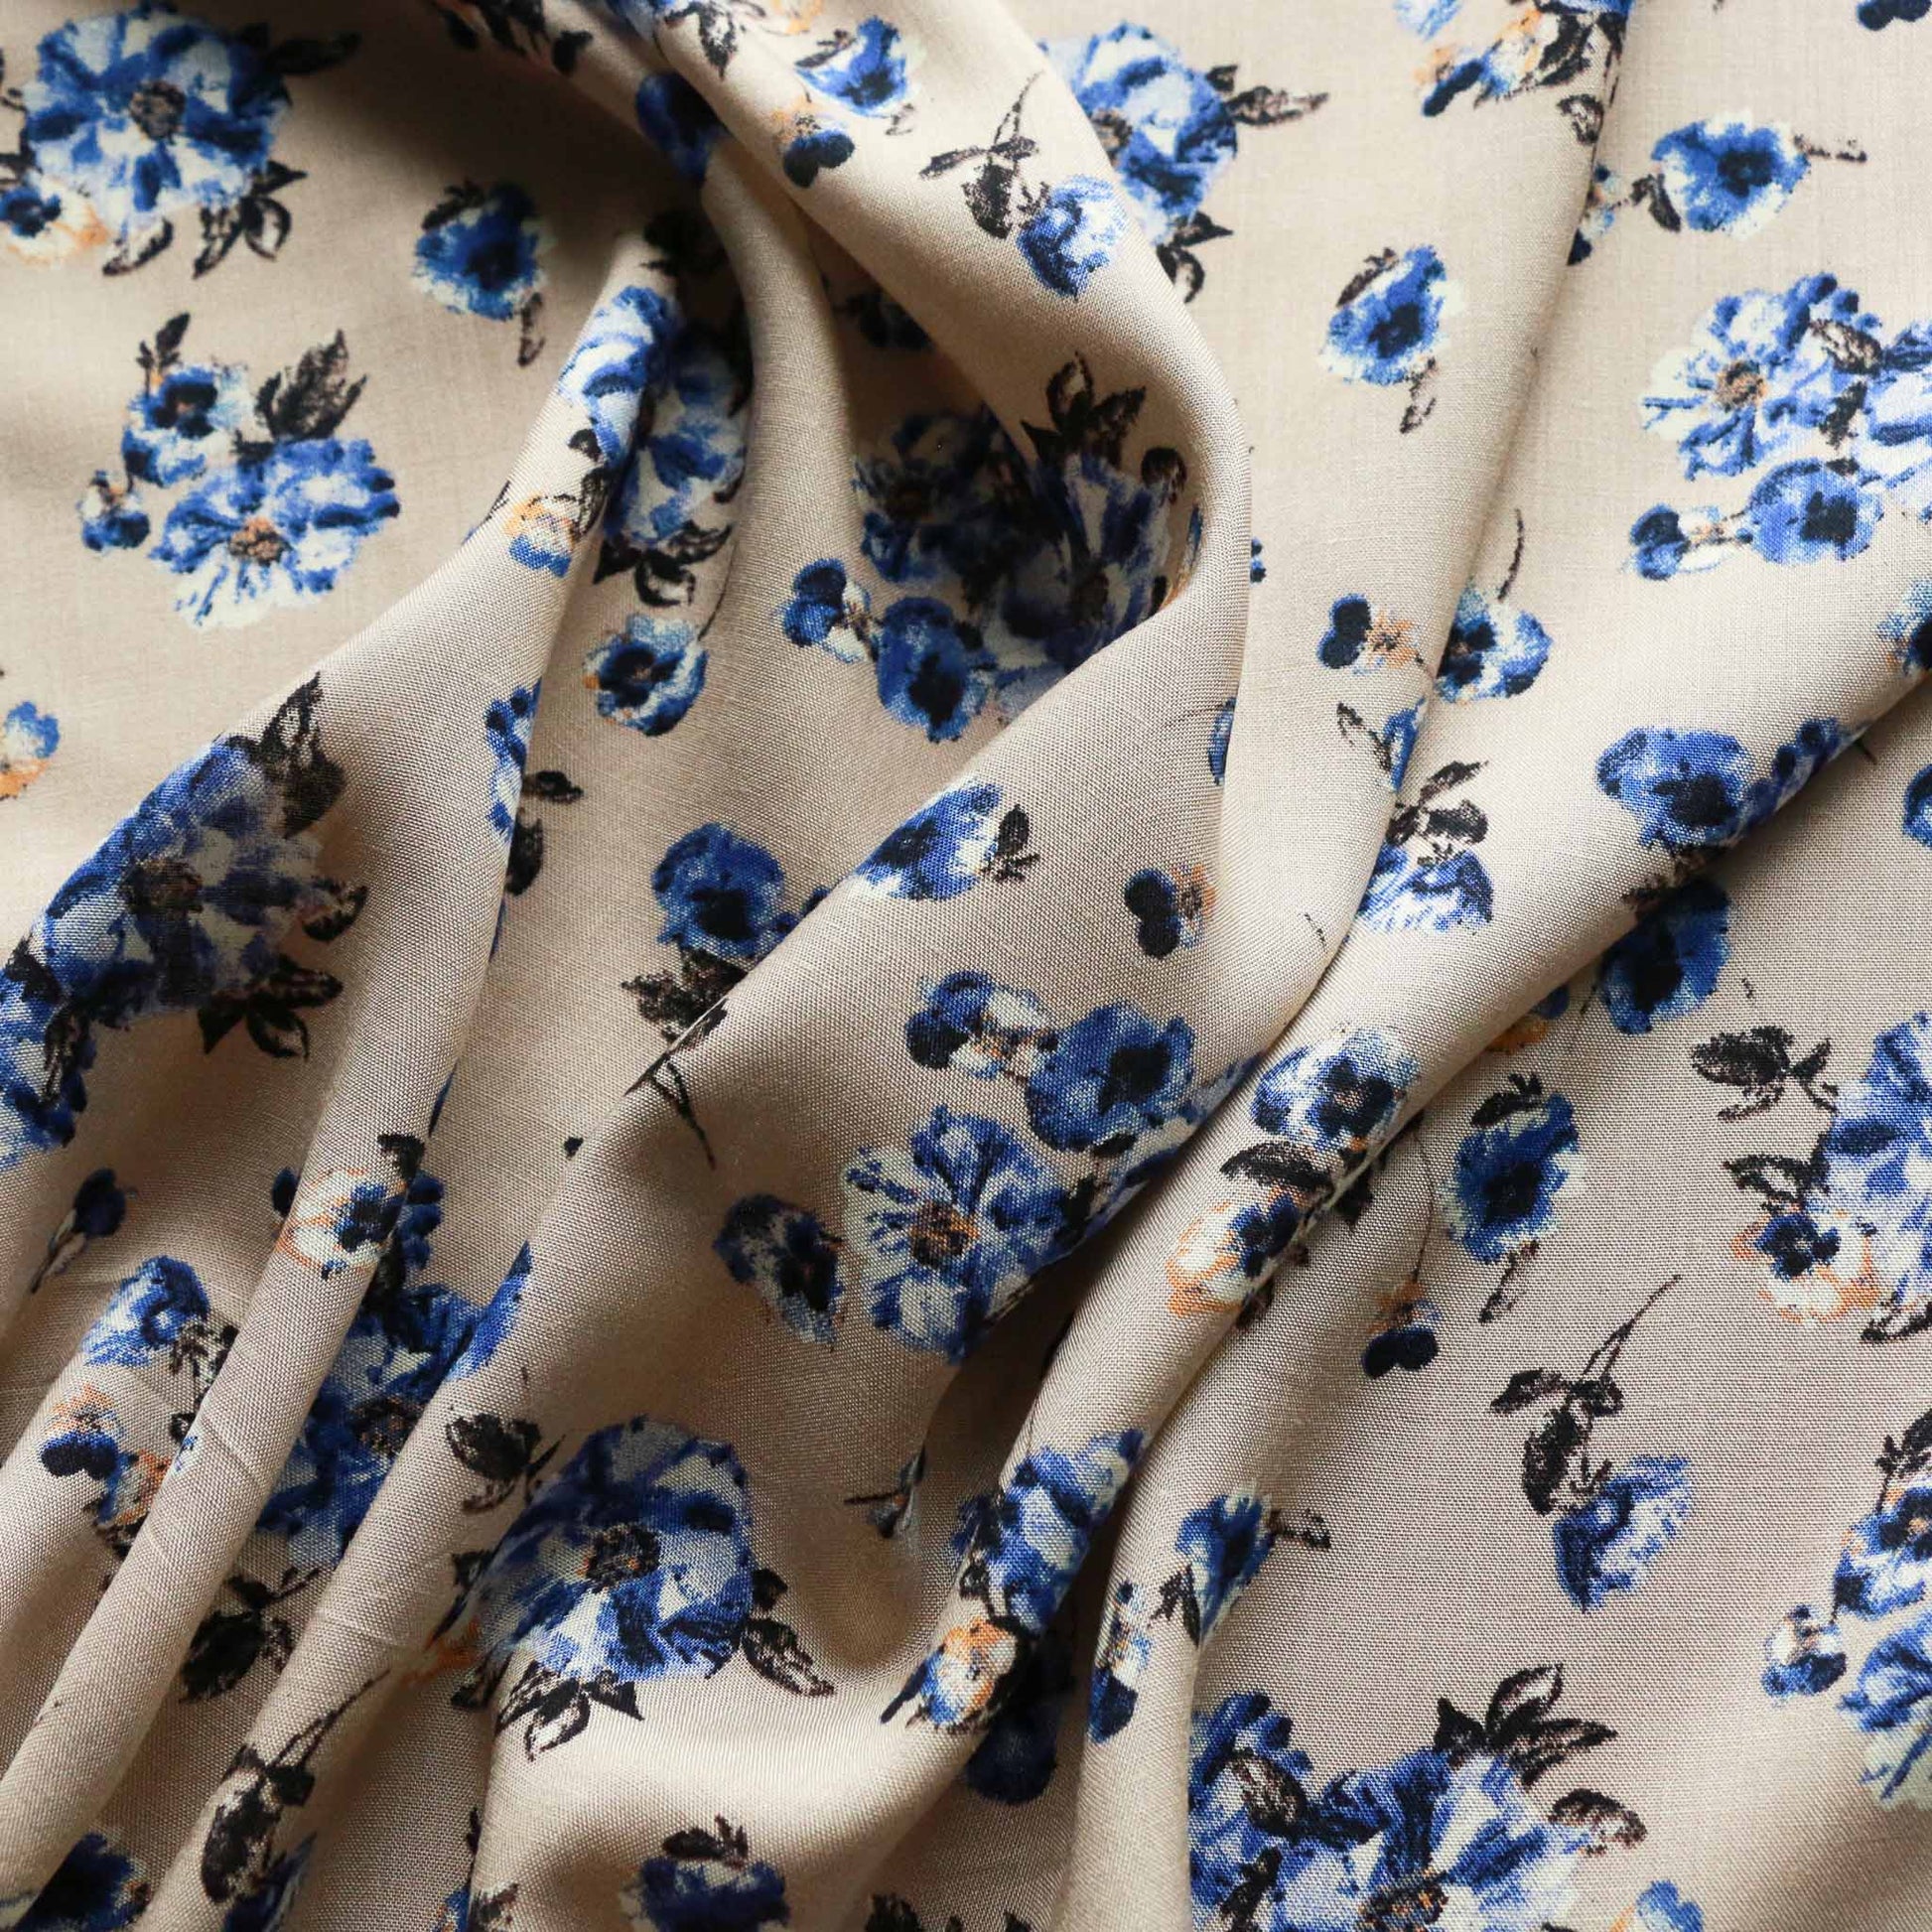 blue flowers printed on earthy beige coloued viscose challis dressmaking rayon fabric